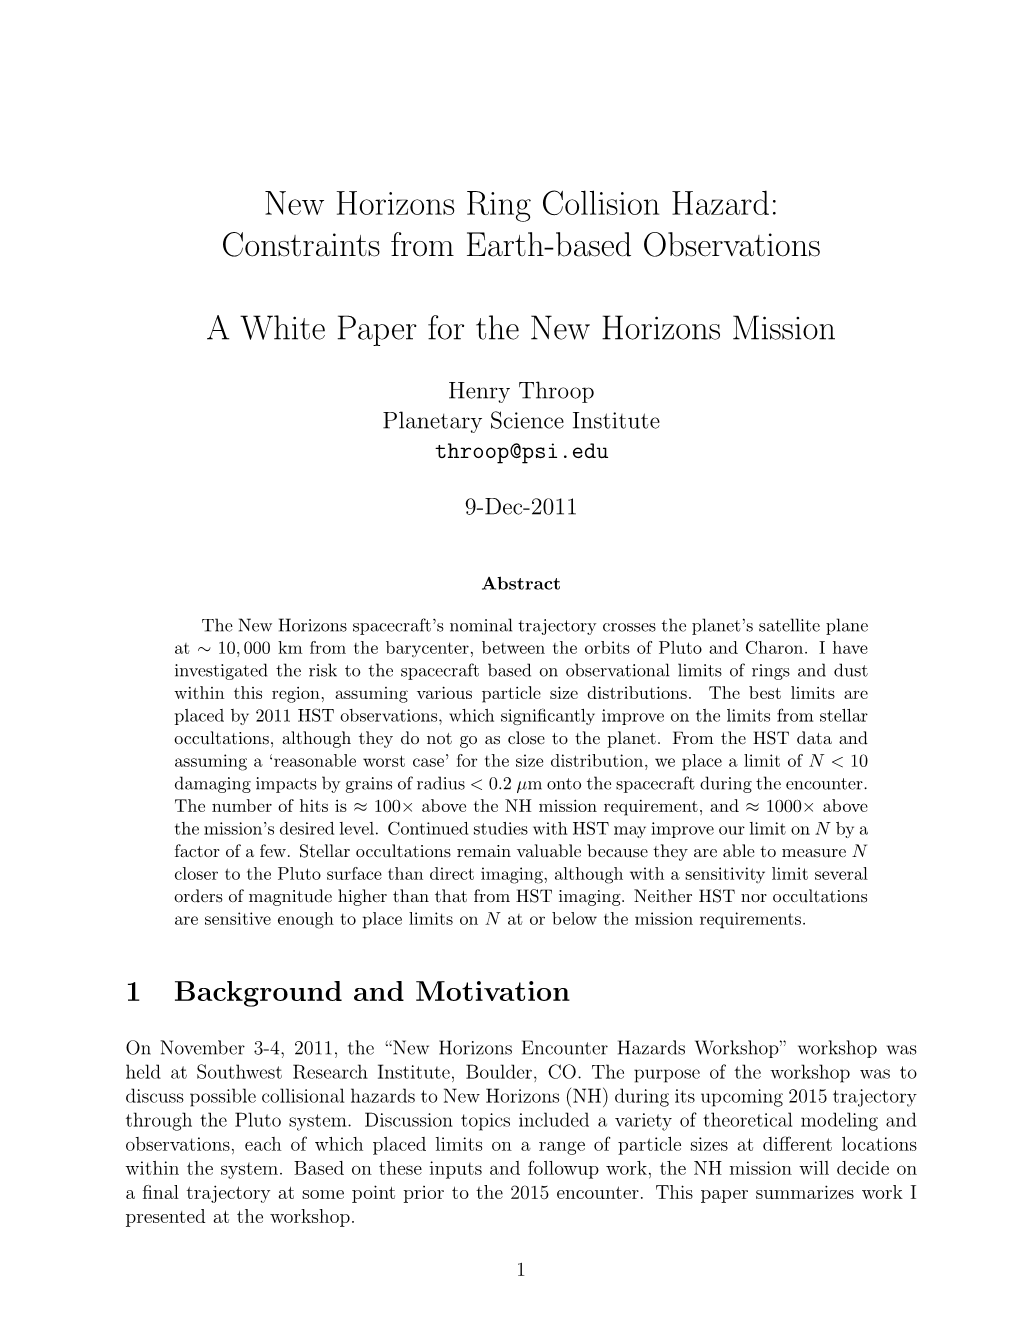 New Horizons Ring Collision Hazard: Constraints from Earth-Based Observations